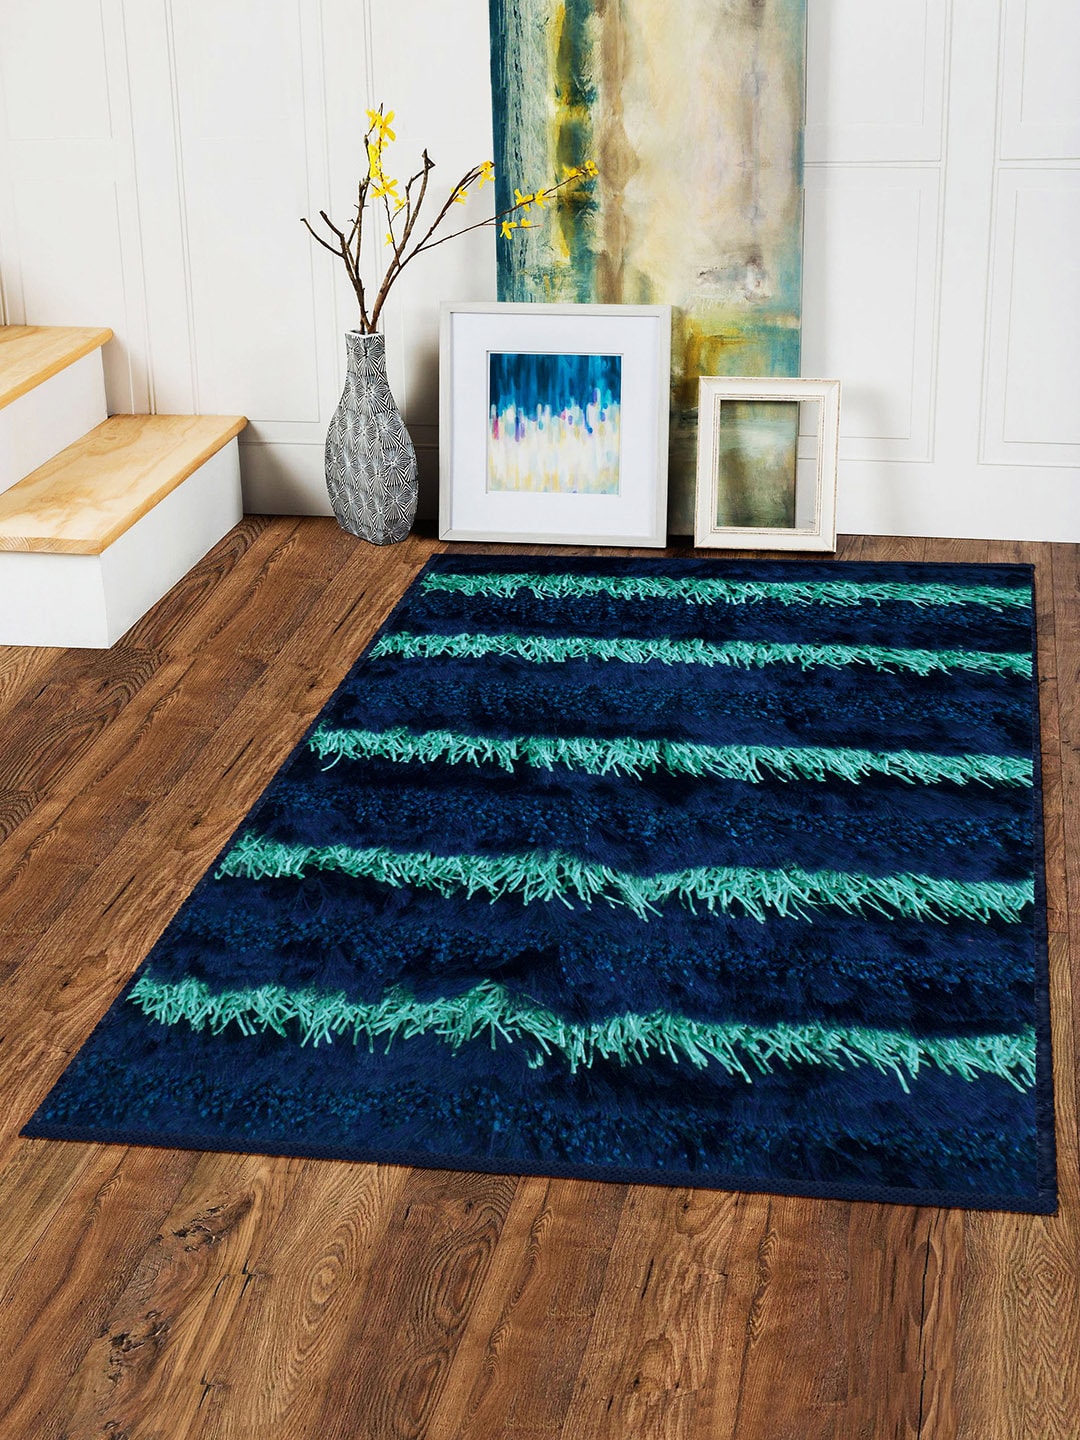 Story@home Blue Striped Carpet Price in India